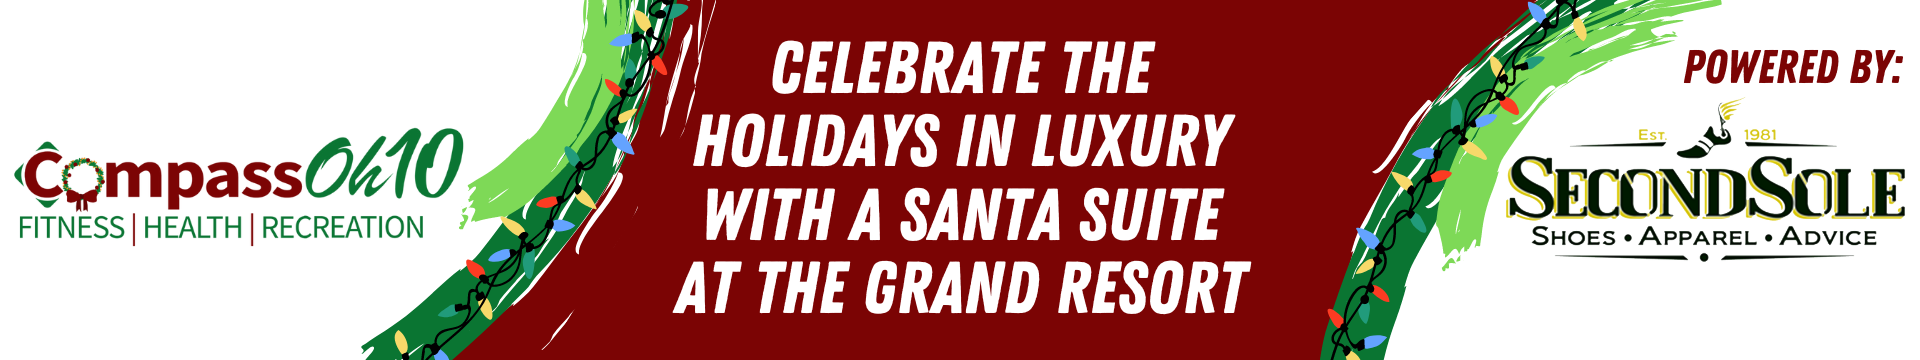 Celebrate the Holidays in Luxury with a Santa Suite at the Grand Resort